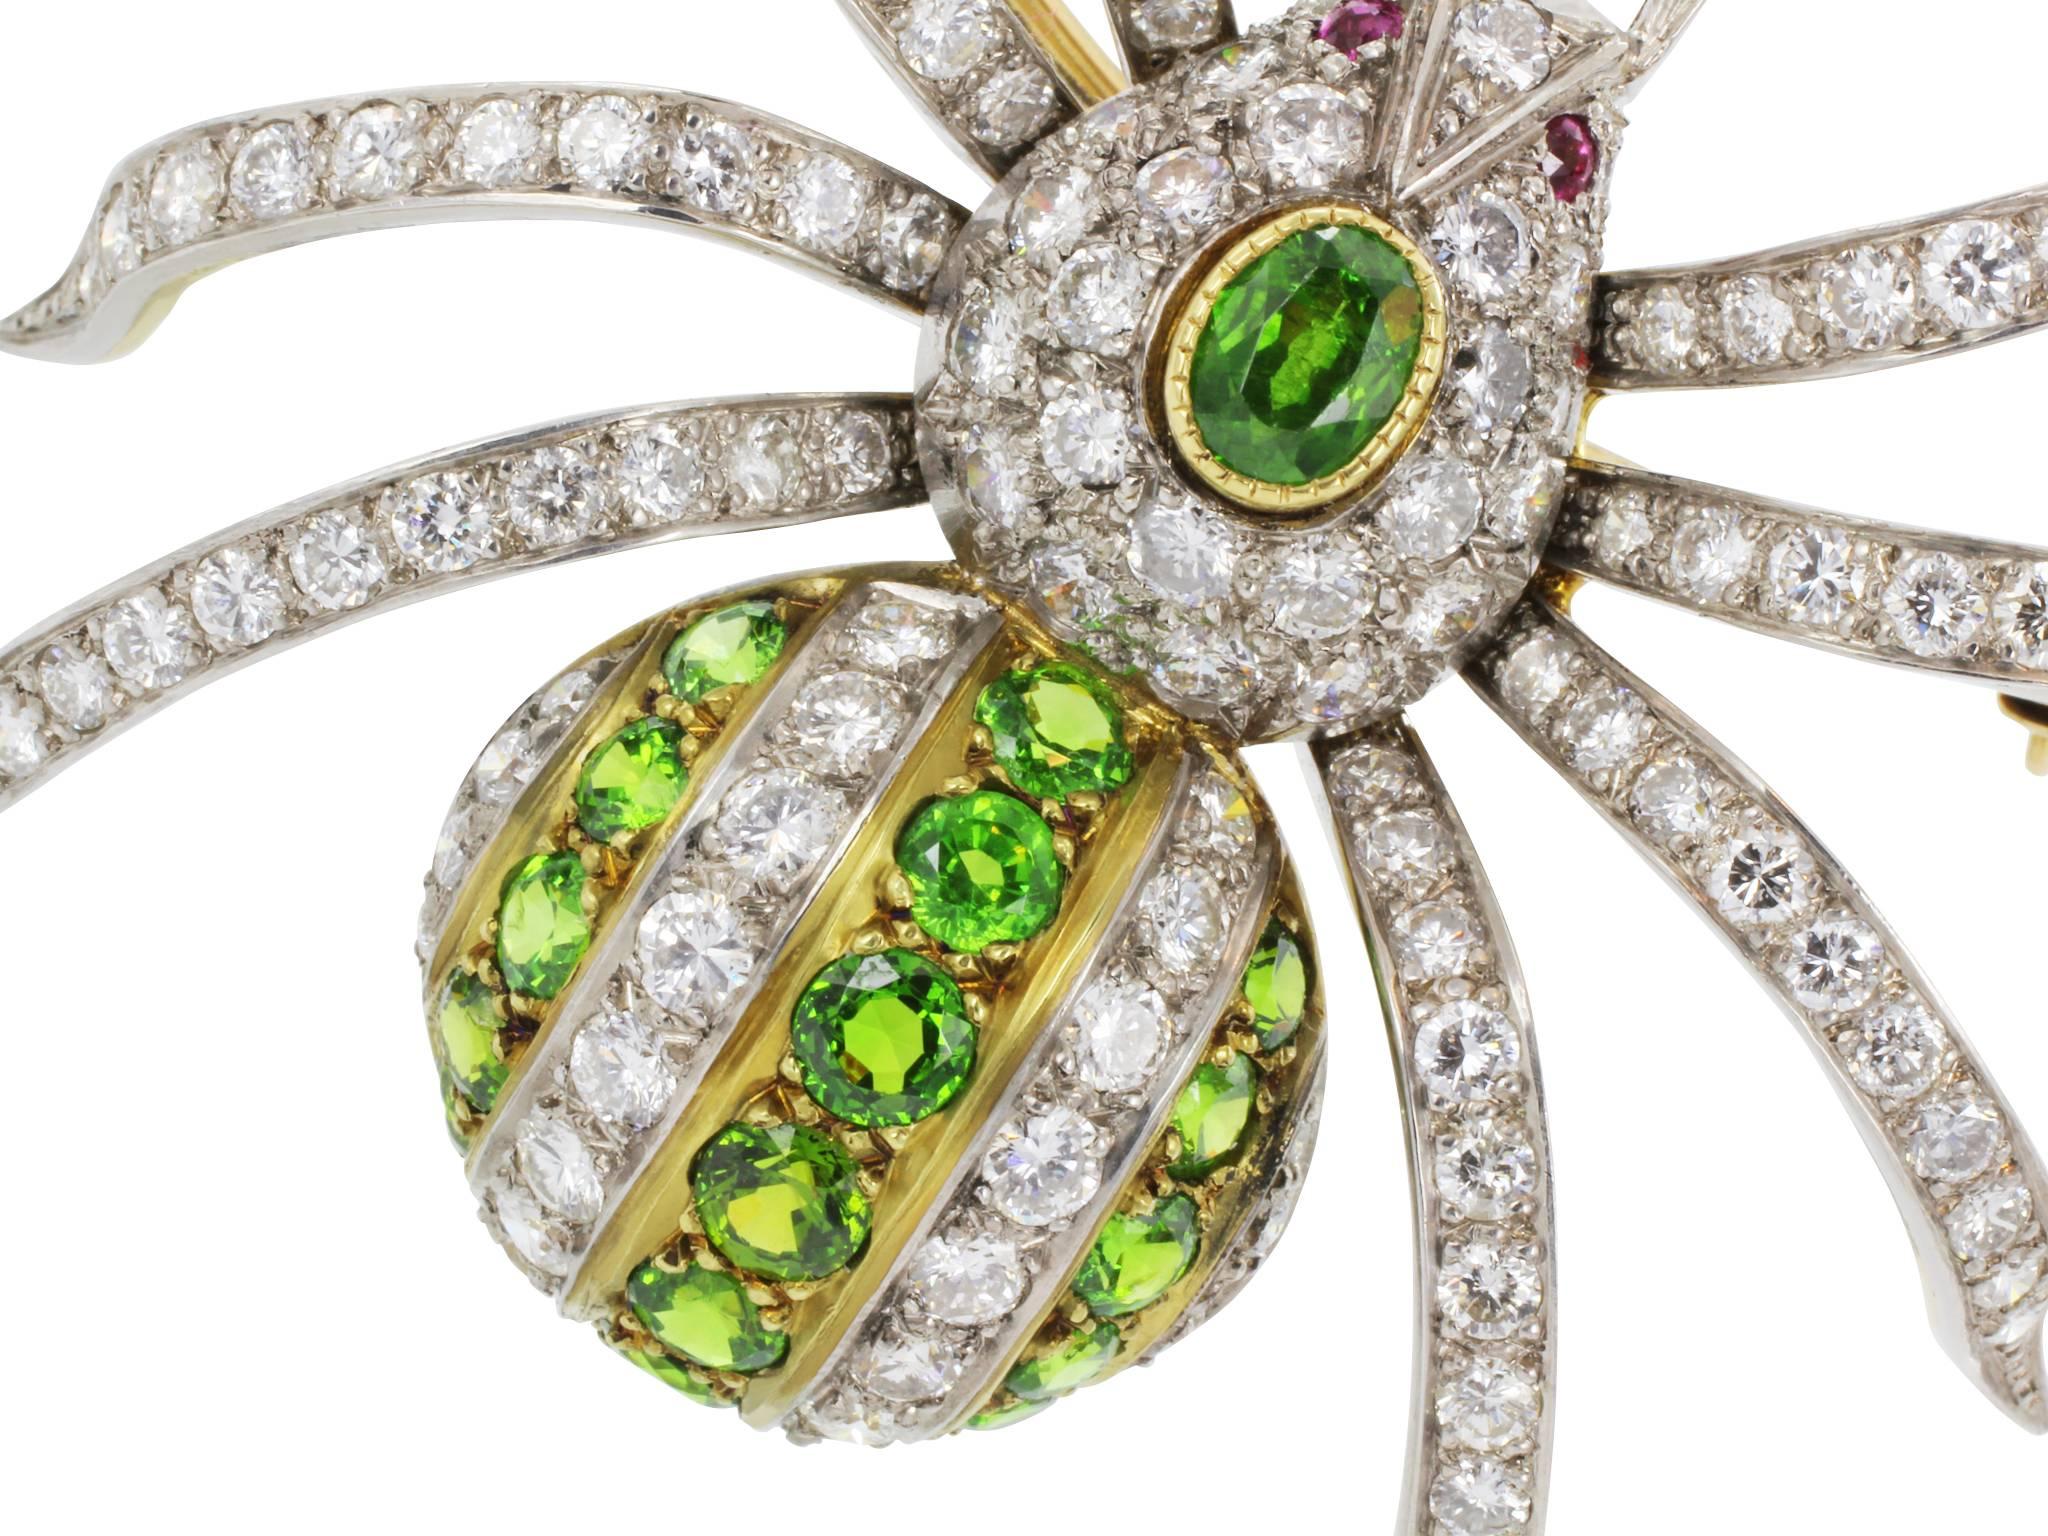 Platinum on 18 karat gold style spider pin set with brilliant cut diamonds weighing  approximately 5.50 cts and demantoid garnets and cabochon ruby eyes.